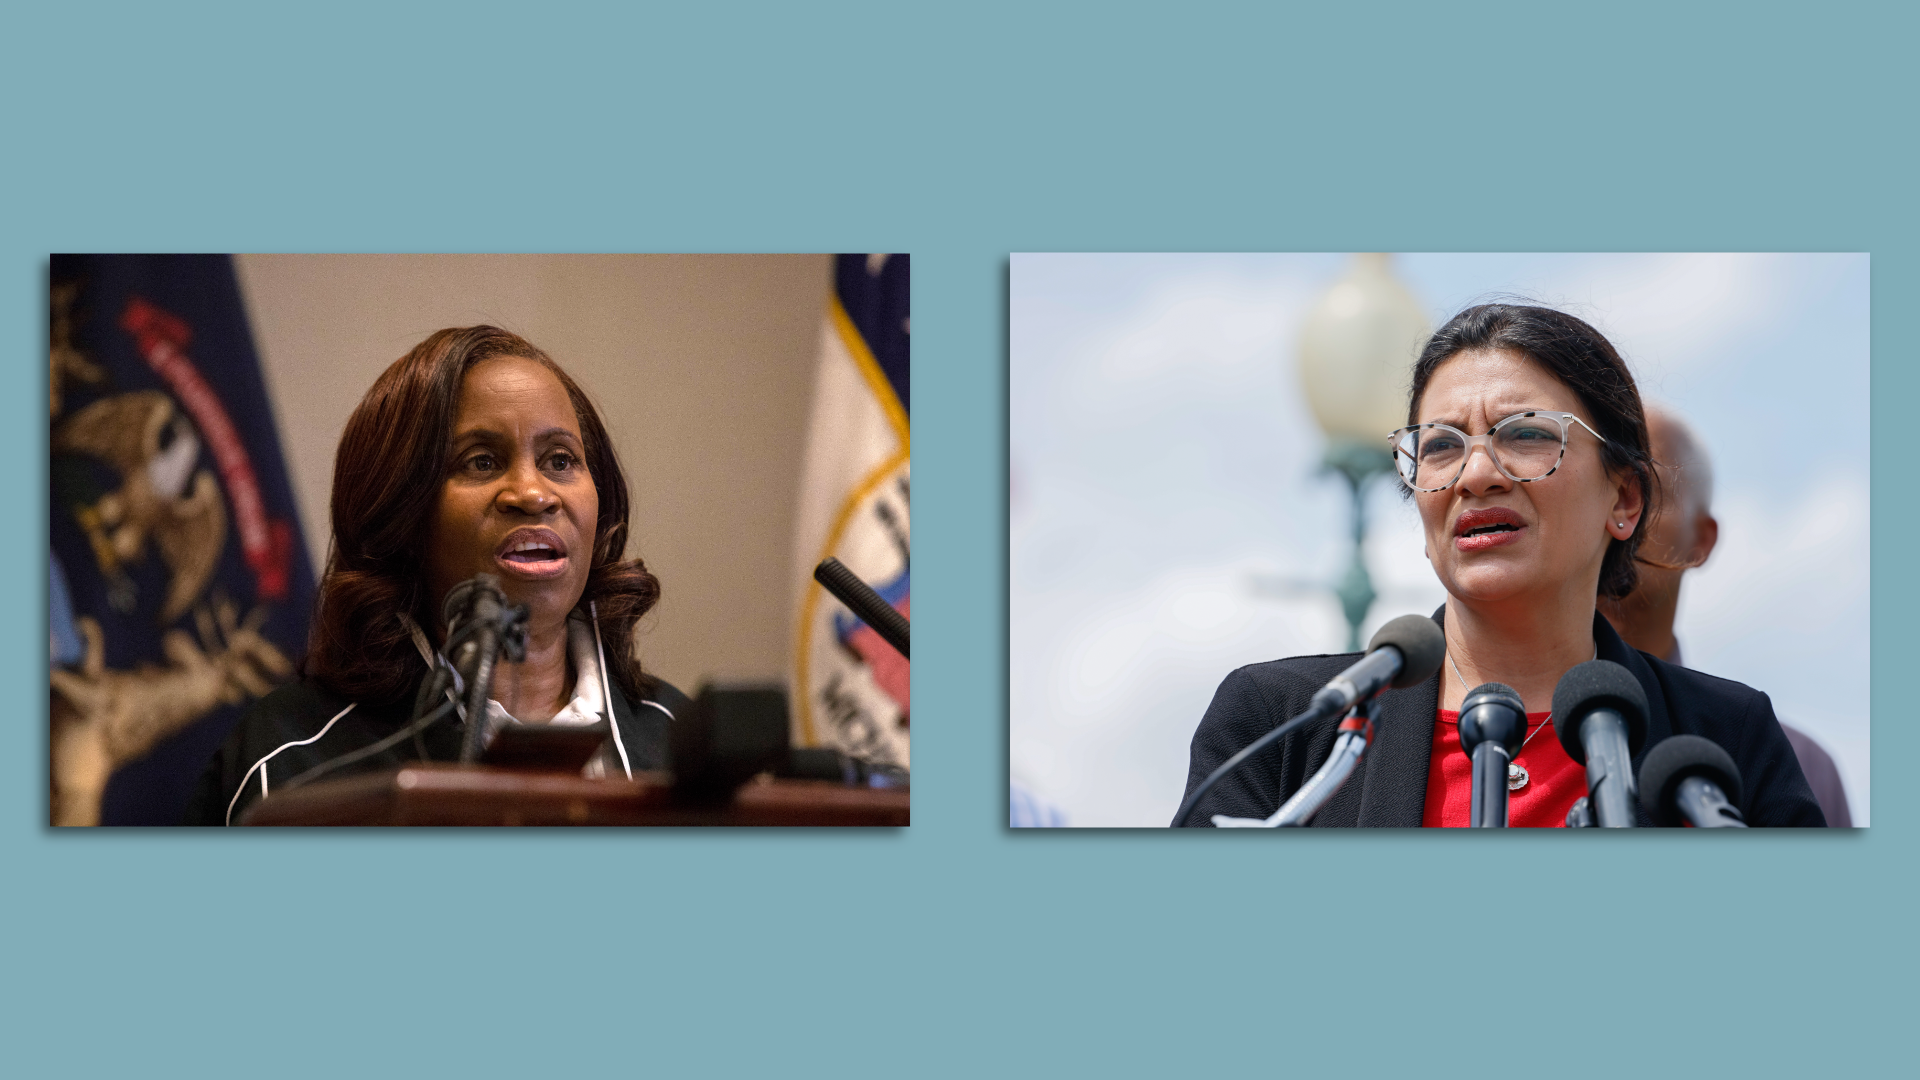 Janice Winfrey and Rashida Tlaib are both pictured speaking at microphones in separate images.